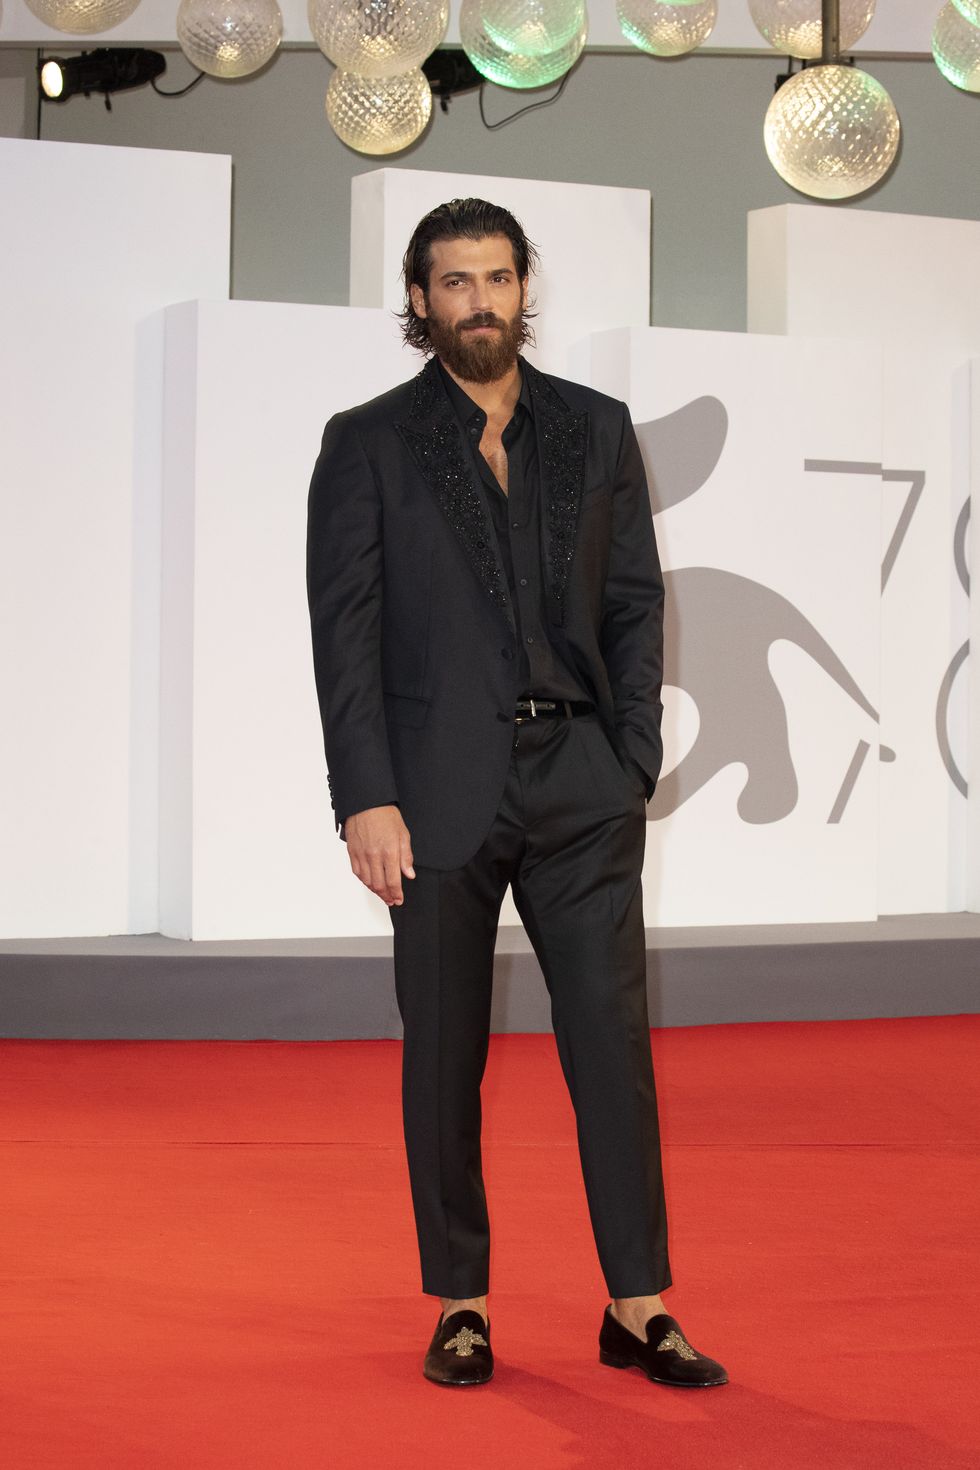 venice, italy   september 05 turkish actor can yaman attends the red carpet of the filming italy award during the 78th venice international film festival on september 05, 2021 in venice, italy photo by primo barolanadolu agency via getty images